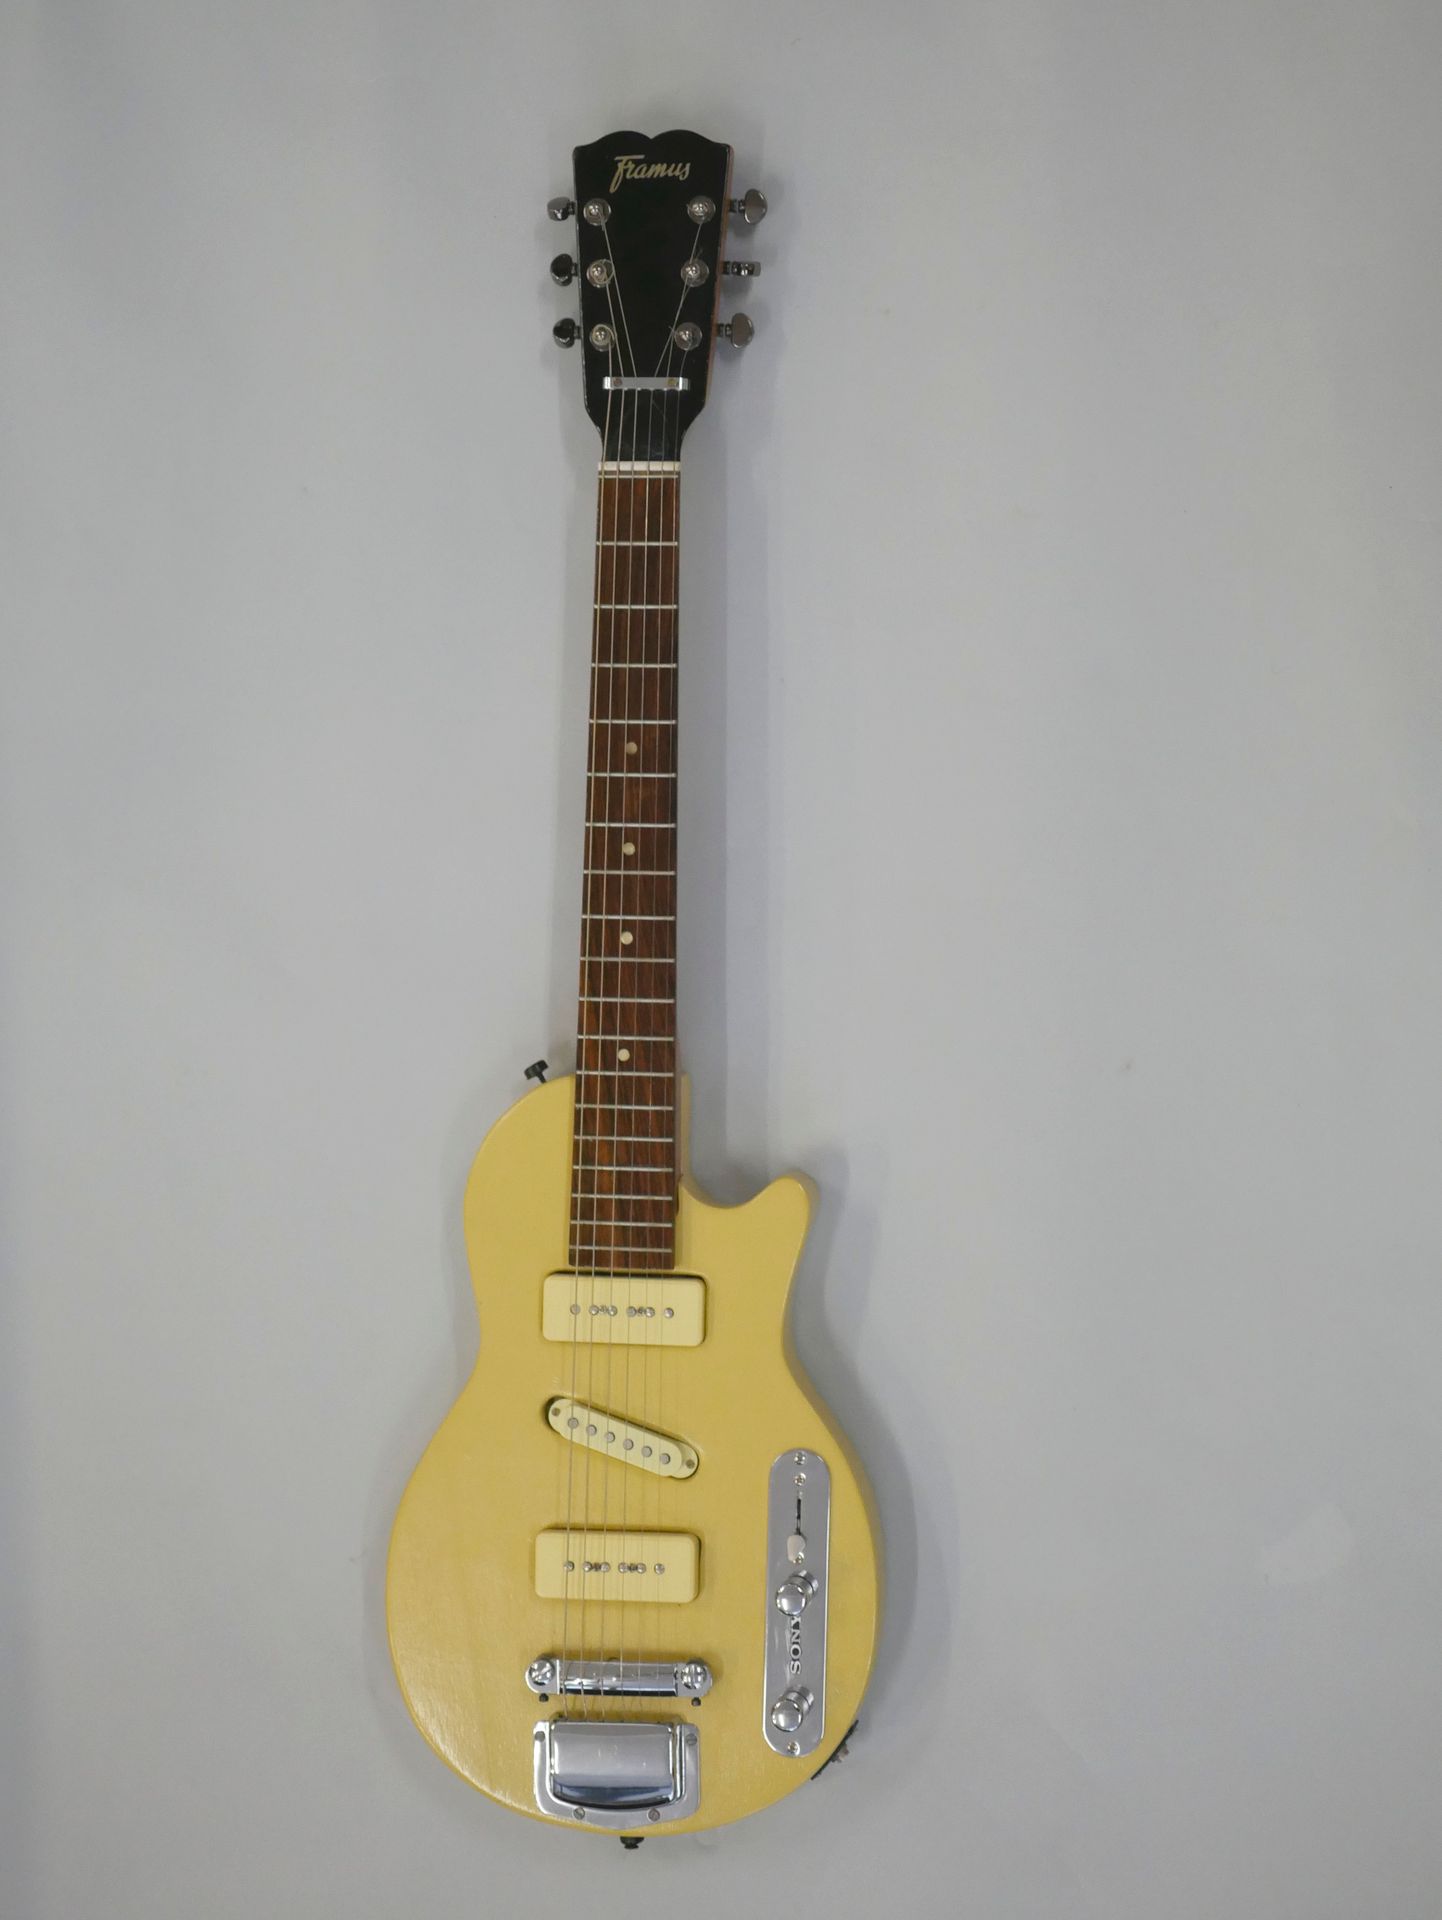 Null Solidbody electric guitar made from a Framus neck. 

Sold as is.